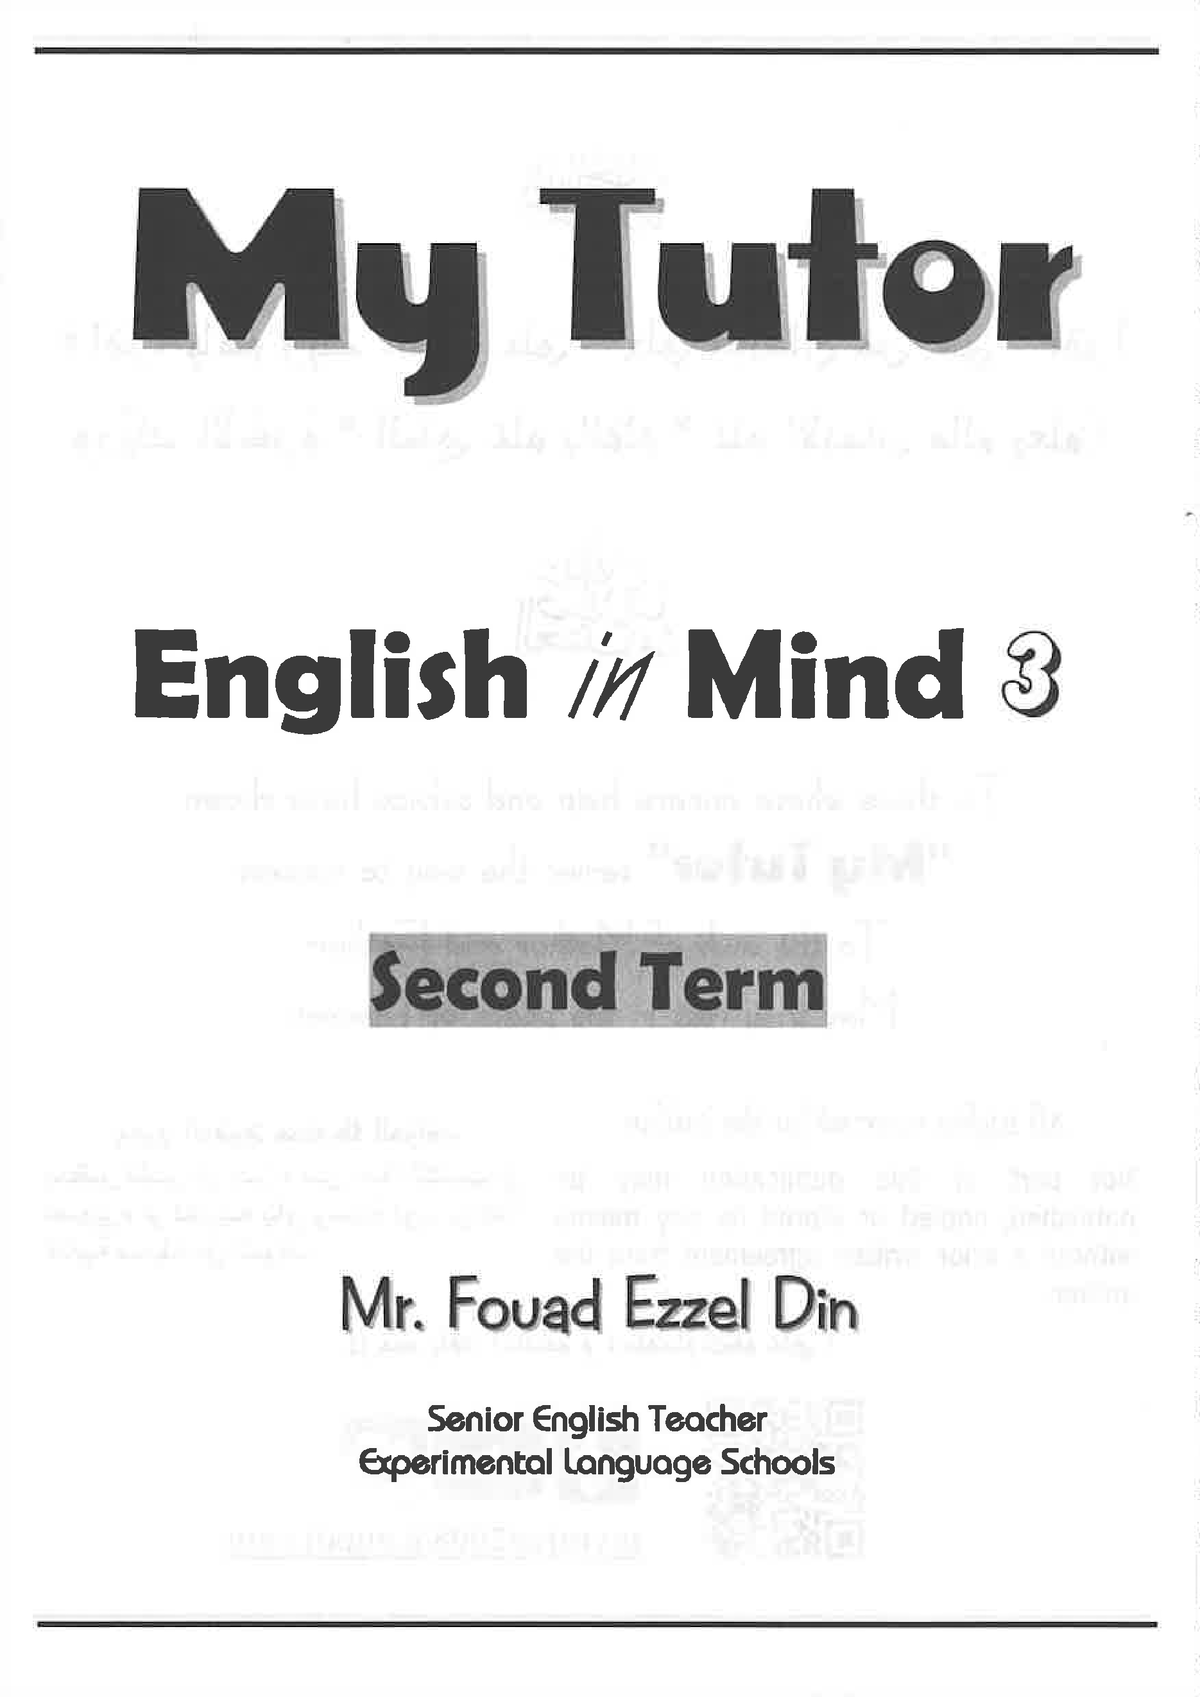 english-in-mind-3-useful-for-experimental-schools-grade-8-learning